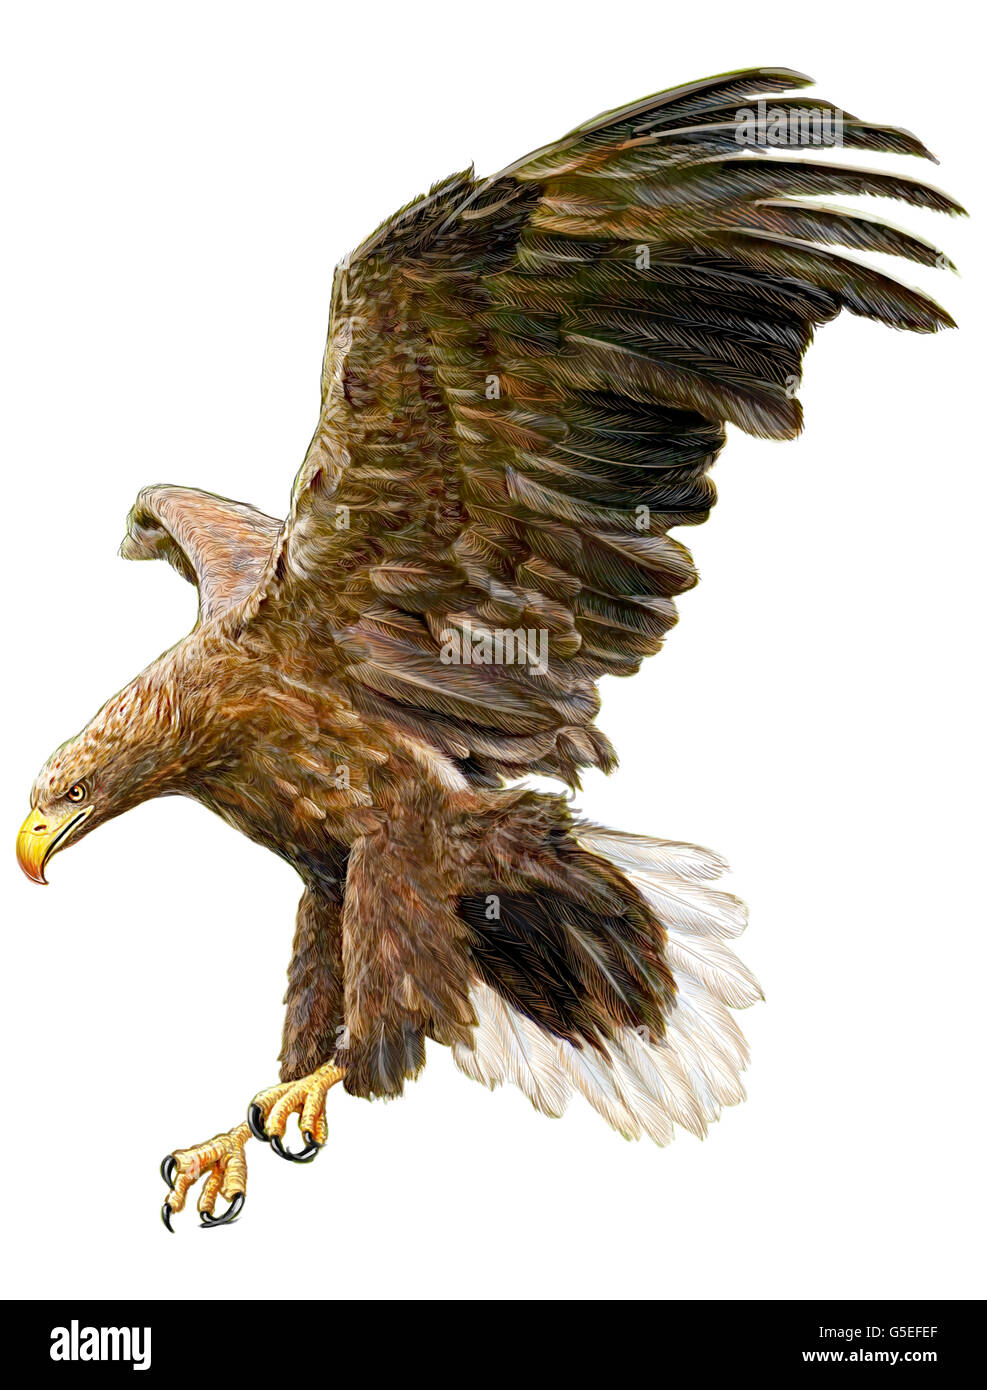 Eagle Drawing High Resolution Stock Photography and Images - Alamy